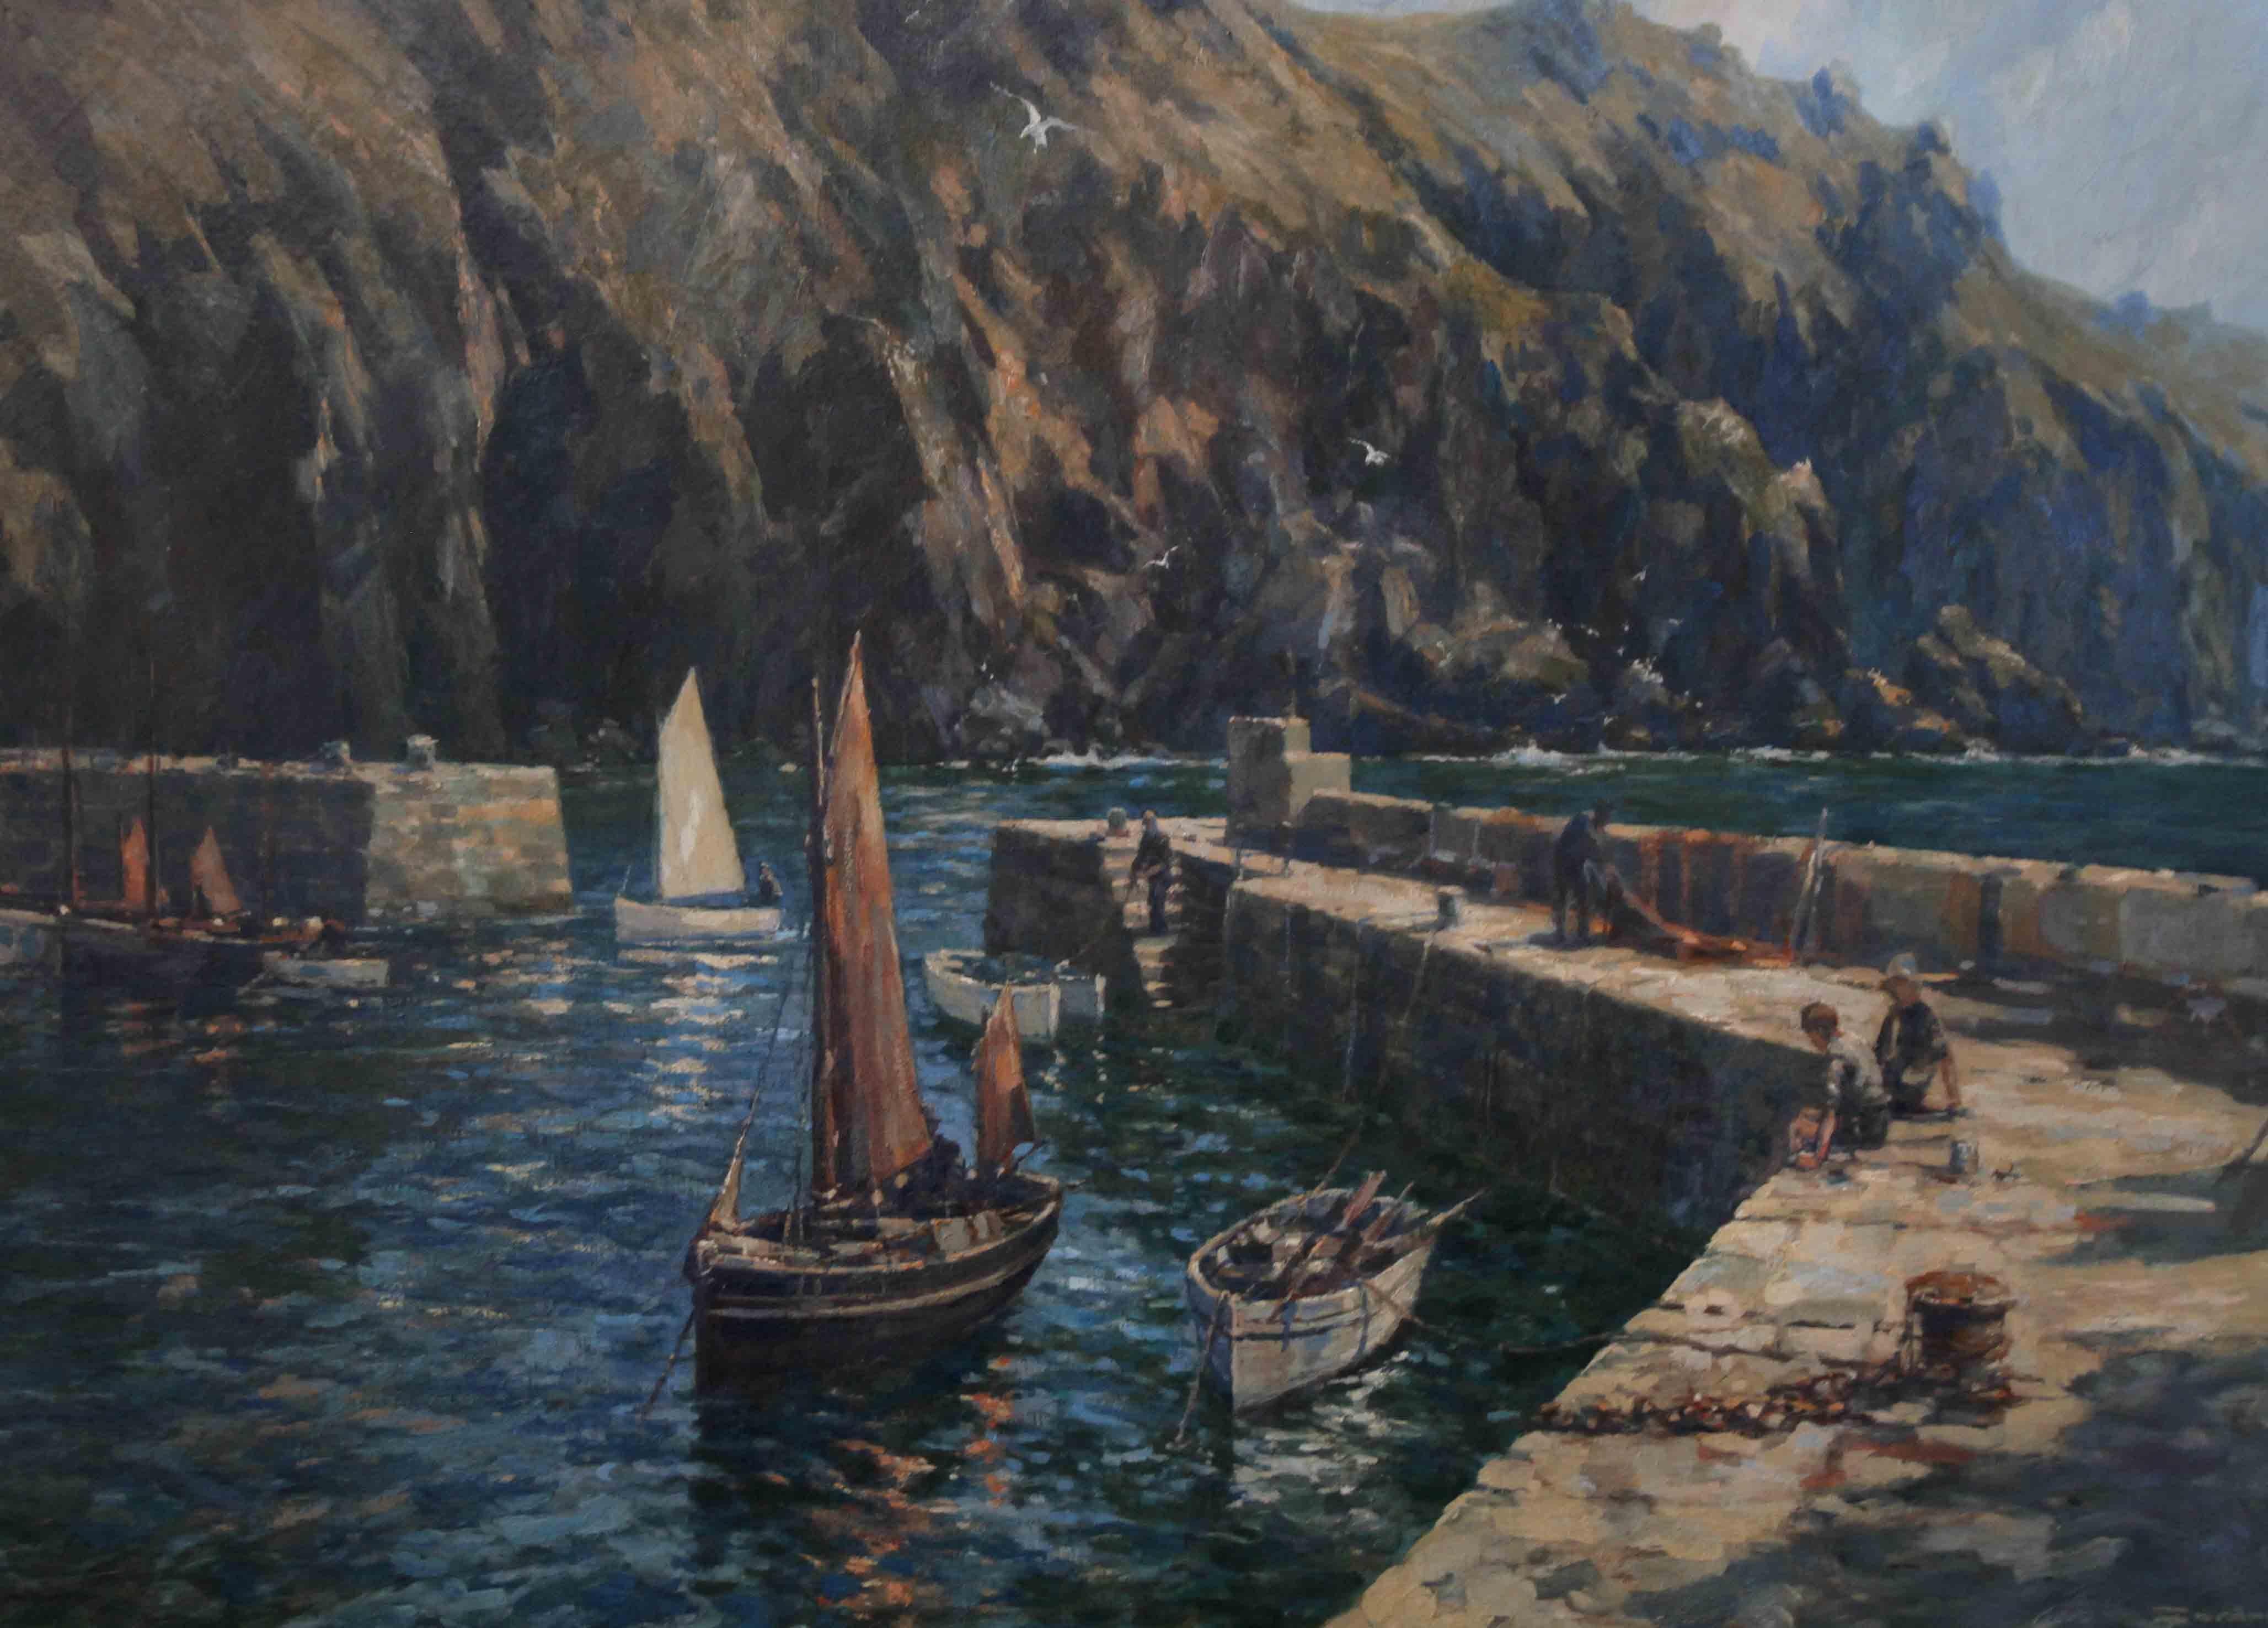 This beautiful and impressive Royal Academy exhibited British Impressionist landscape oil painting is by noted artist Frederick Gordon Crosby. It was painted and exhibited in 1921 and depicts Mullion Cove and its harbour in Cornwall. Mullion Cove is